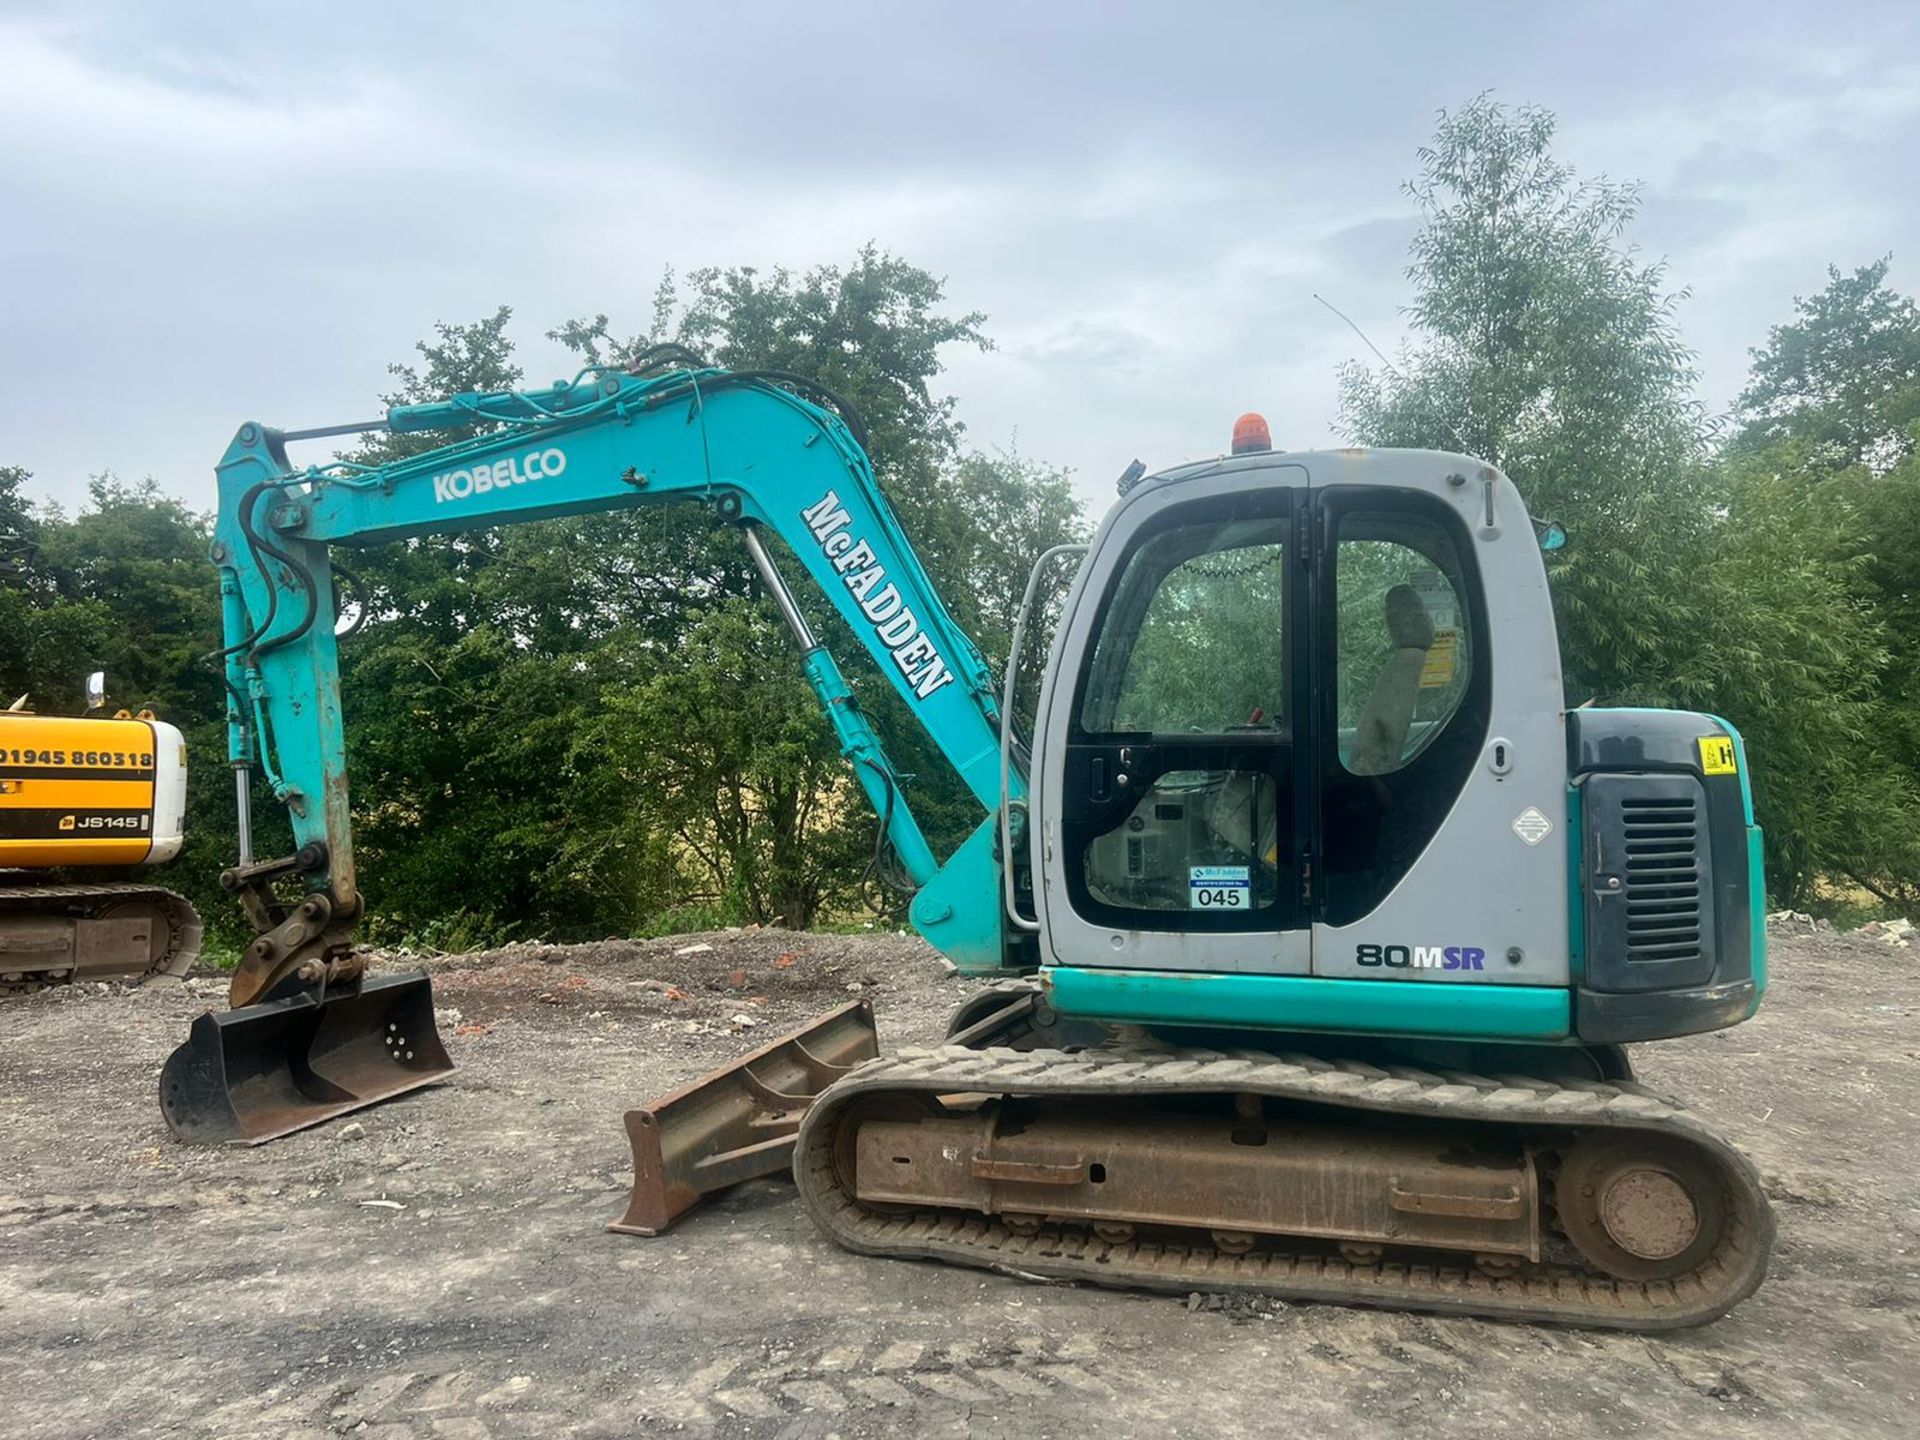 Kobelco 80MSR 8 Tonne Excavator With Blade, Runs Drives And Digs,Showing A Low 9117 Hours!*PLUS VAT* - Image 4 of 29